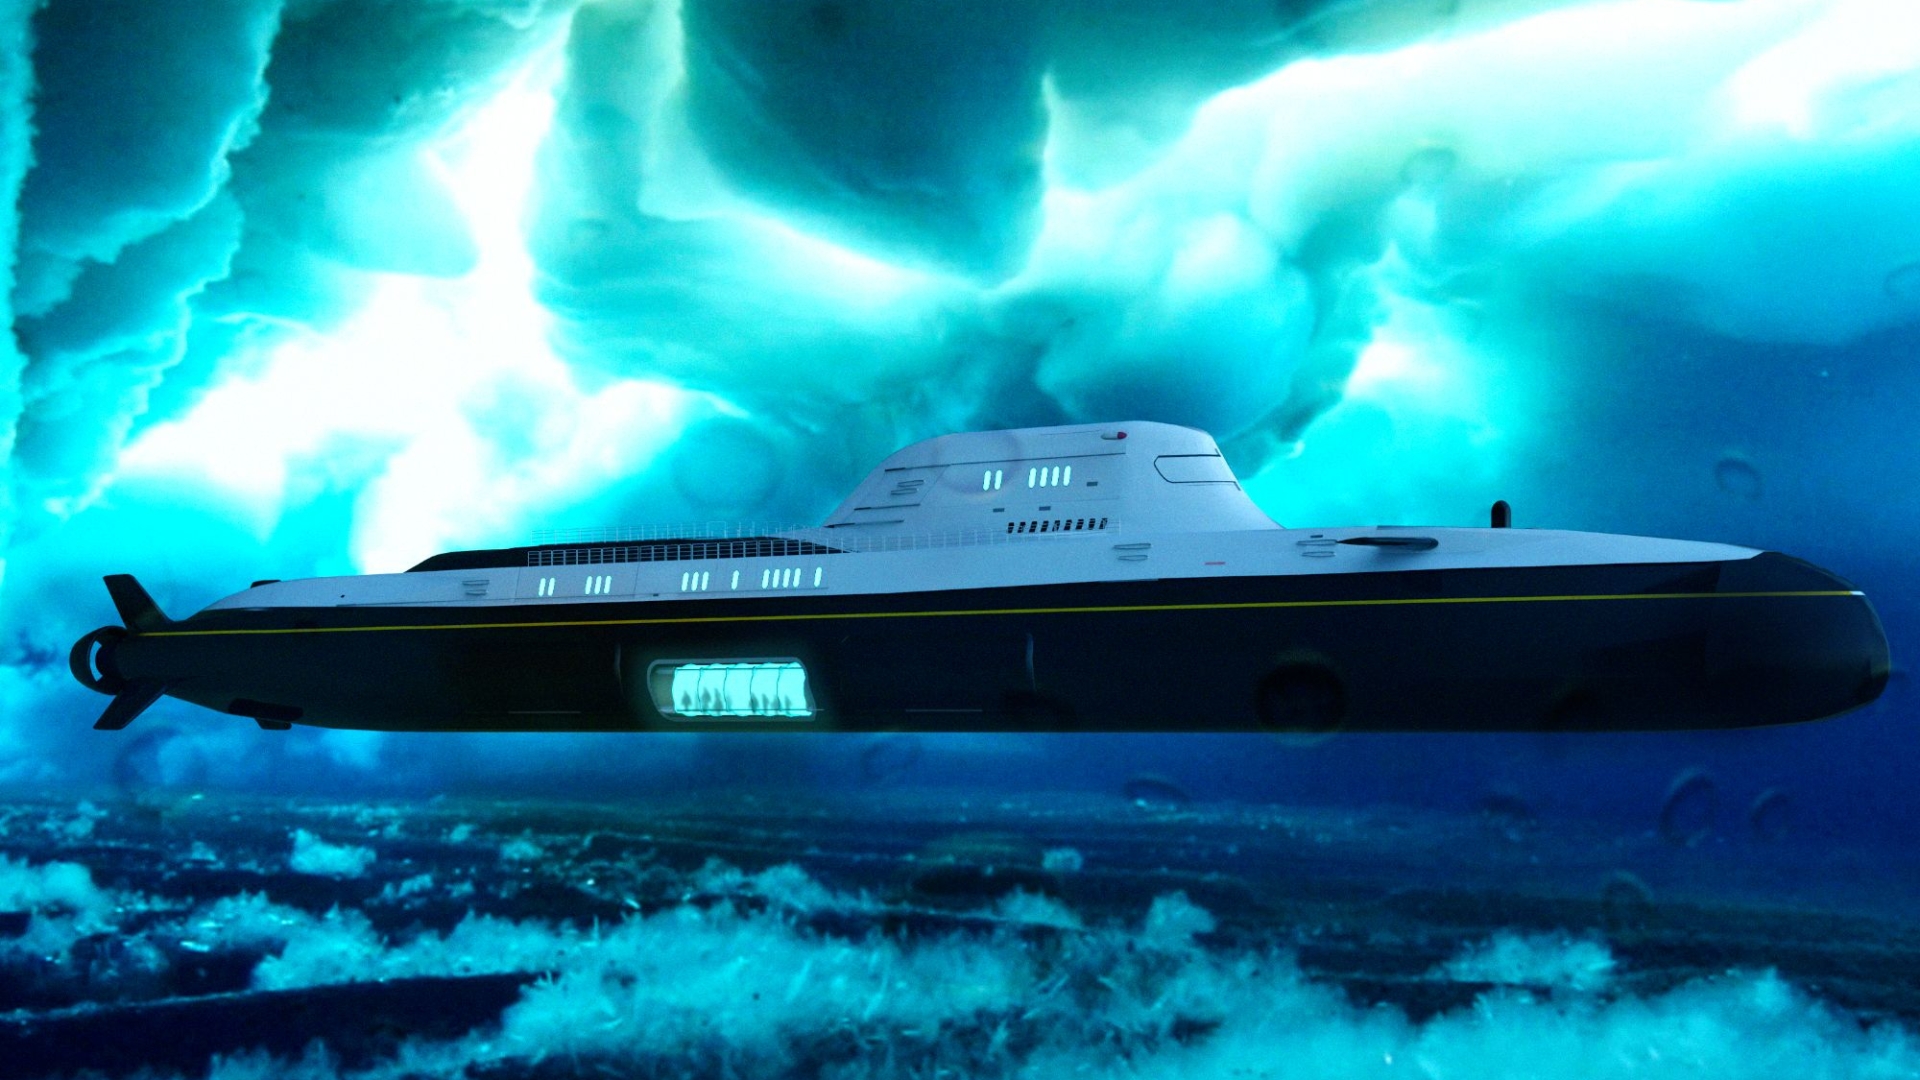 The Bond villain luxury MEGA SUBMARINE is 900ft long and can accommodate 80 guests.